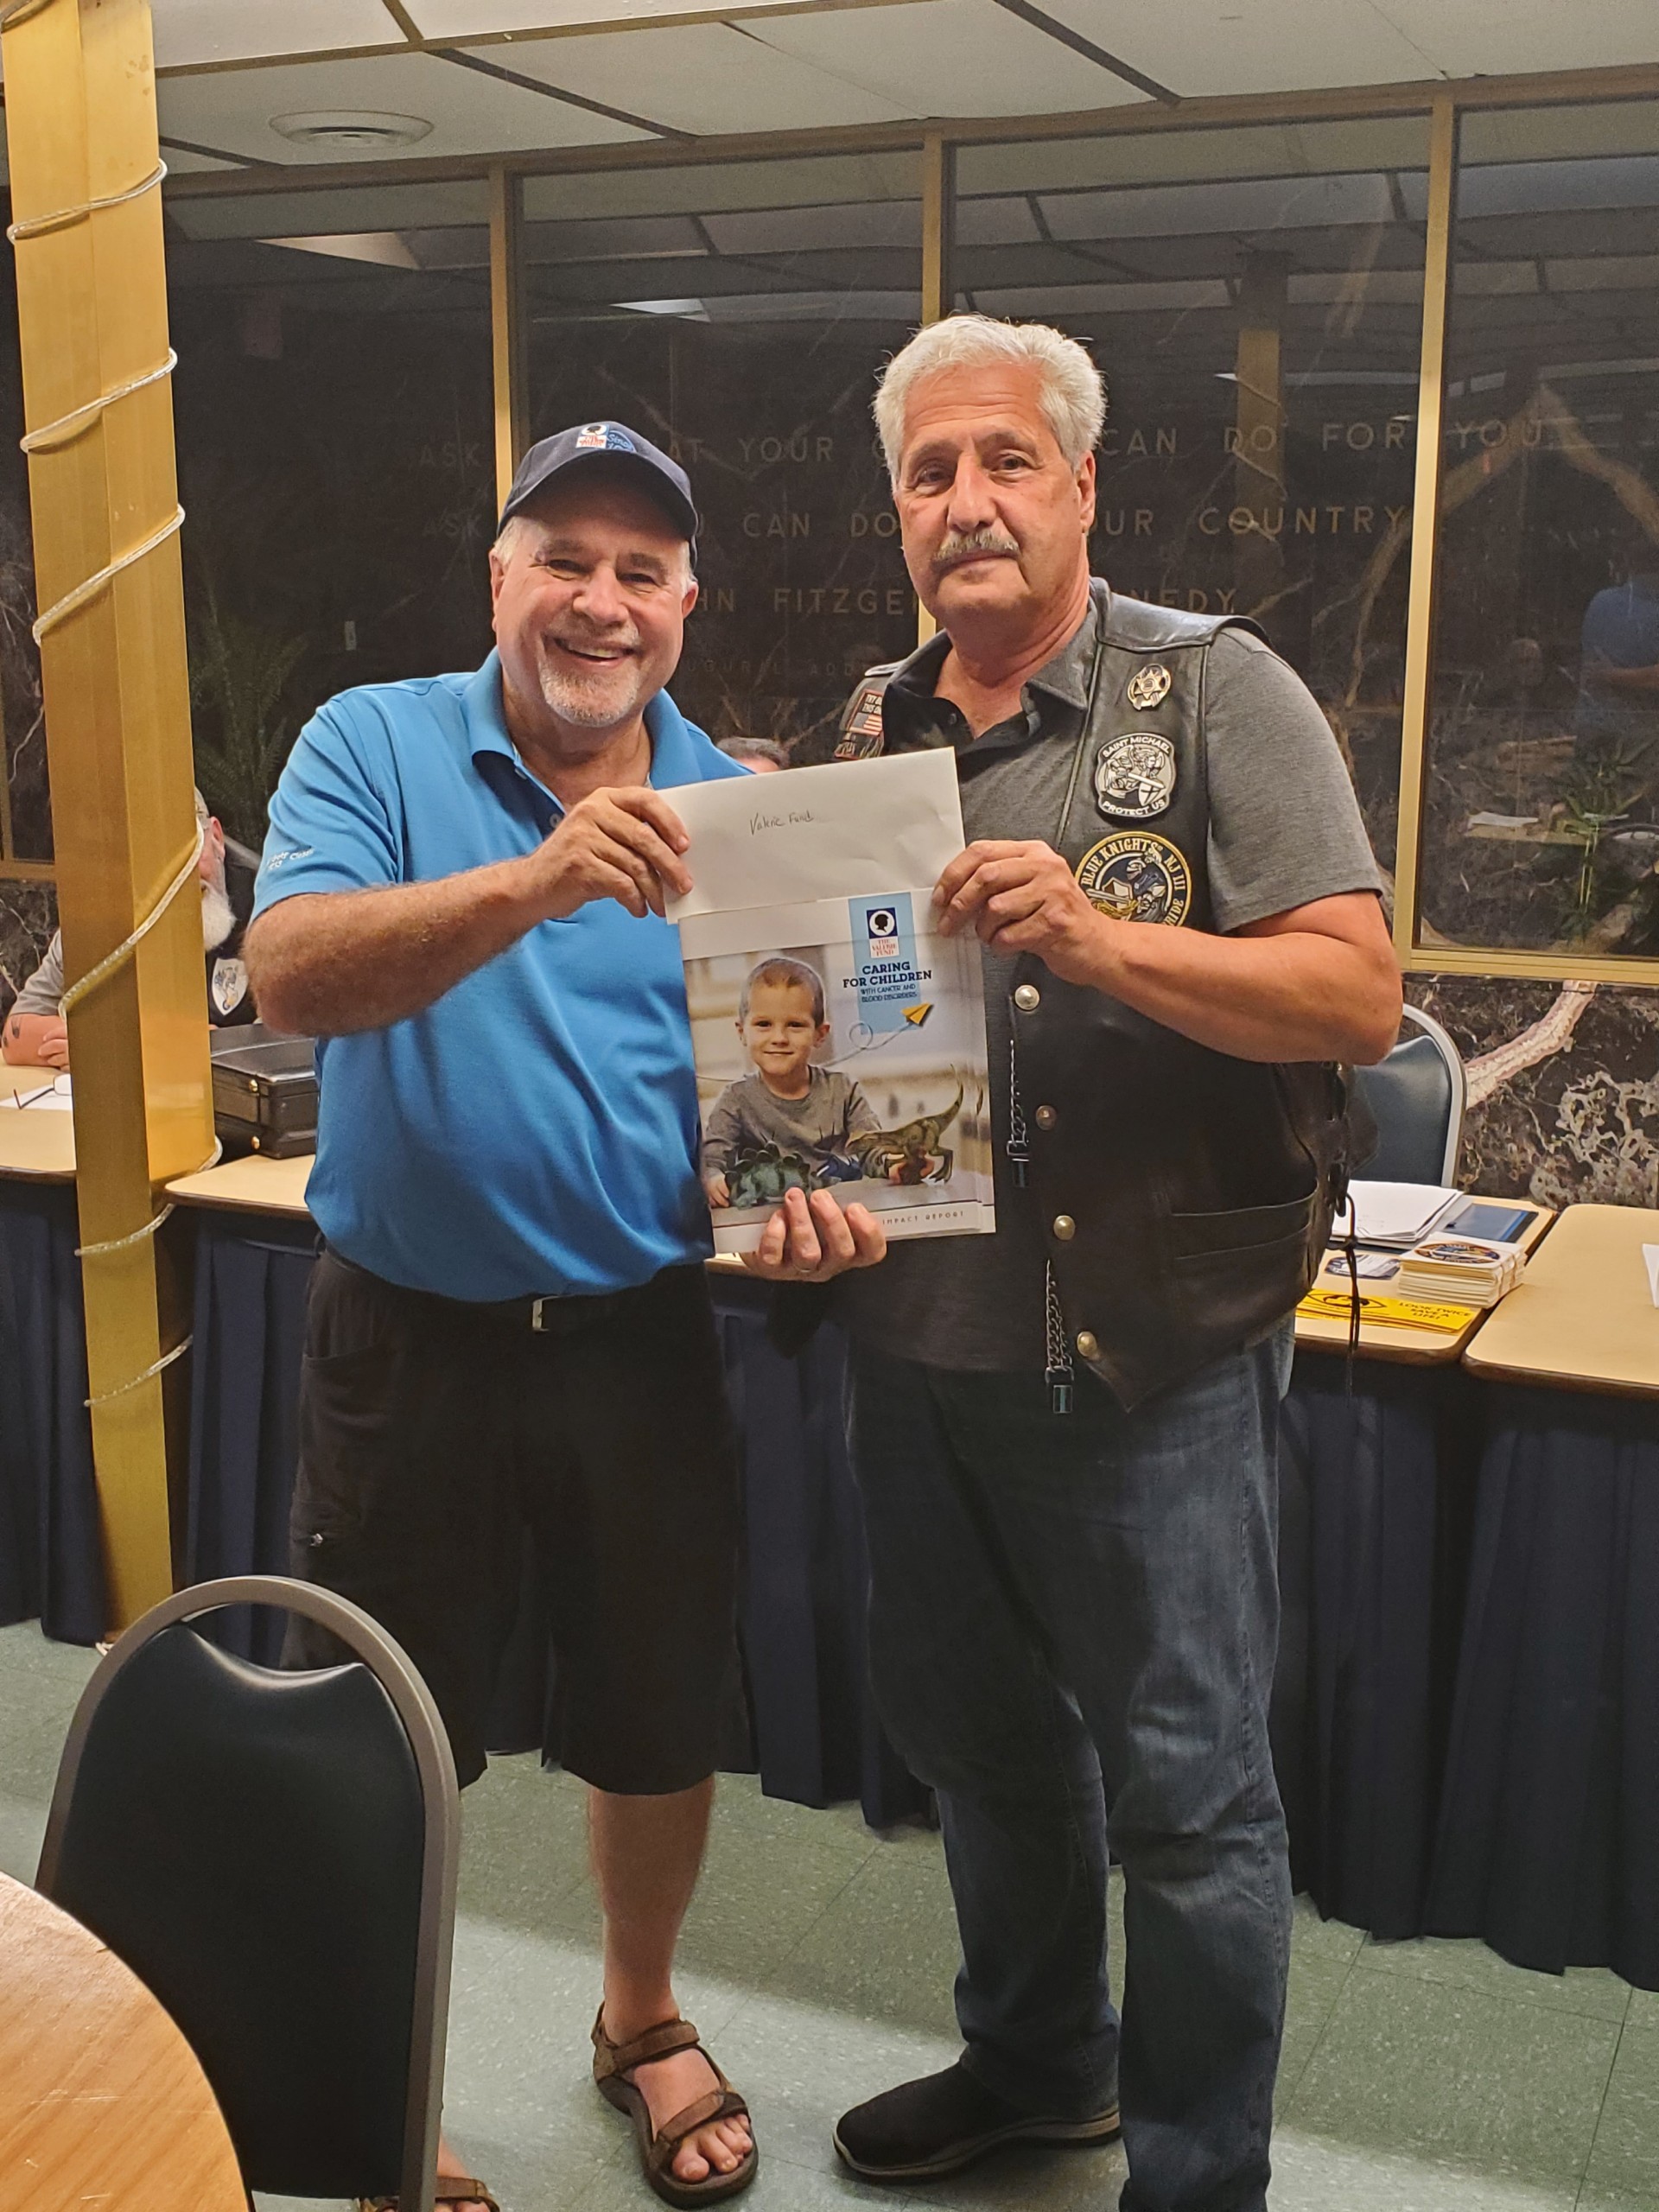 6/8/2021: Our President Jeff Joy presents a donation check to Barry Kirschner, Executive Director of the Valerie Fund (our primary charity) from the proceeds of our recent Cigar Night Charity Event.